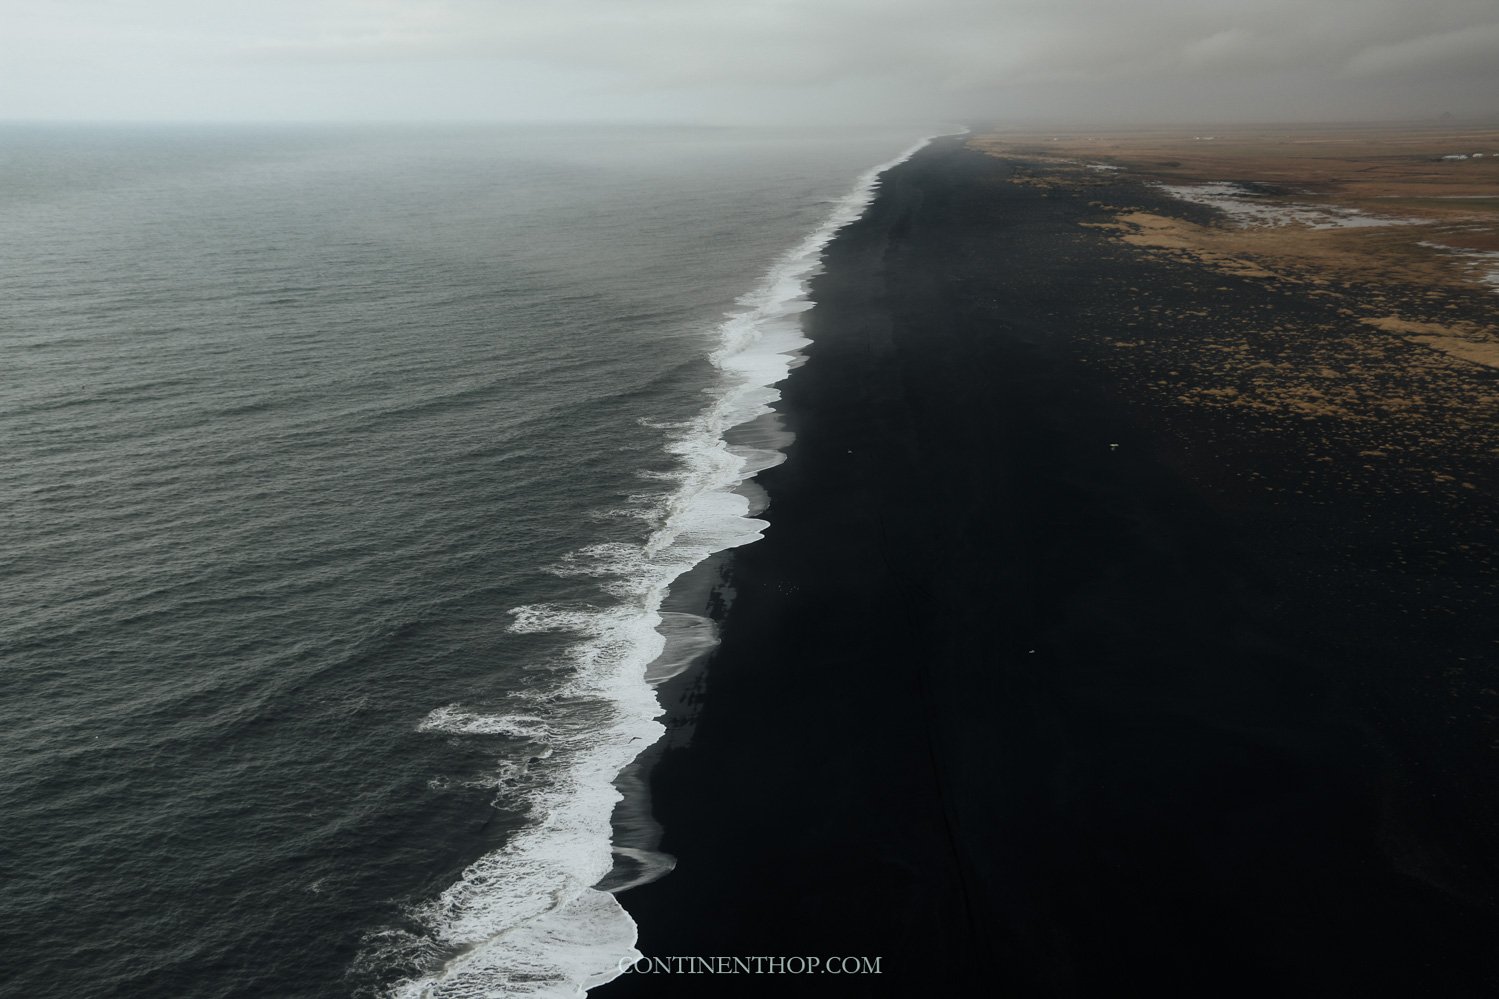 traveling to iceland in August visit the Black sand beach